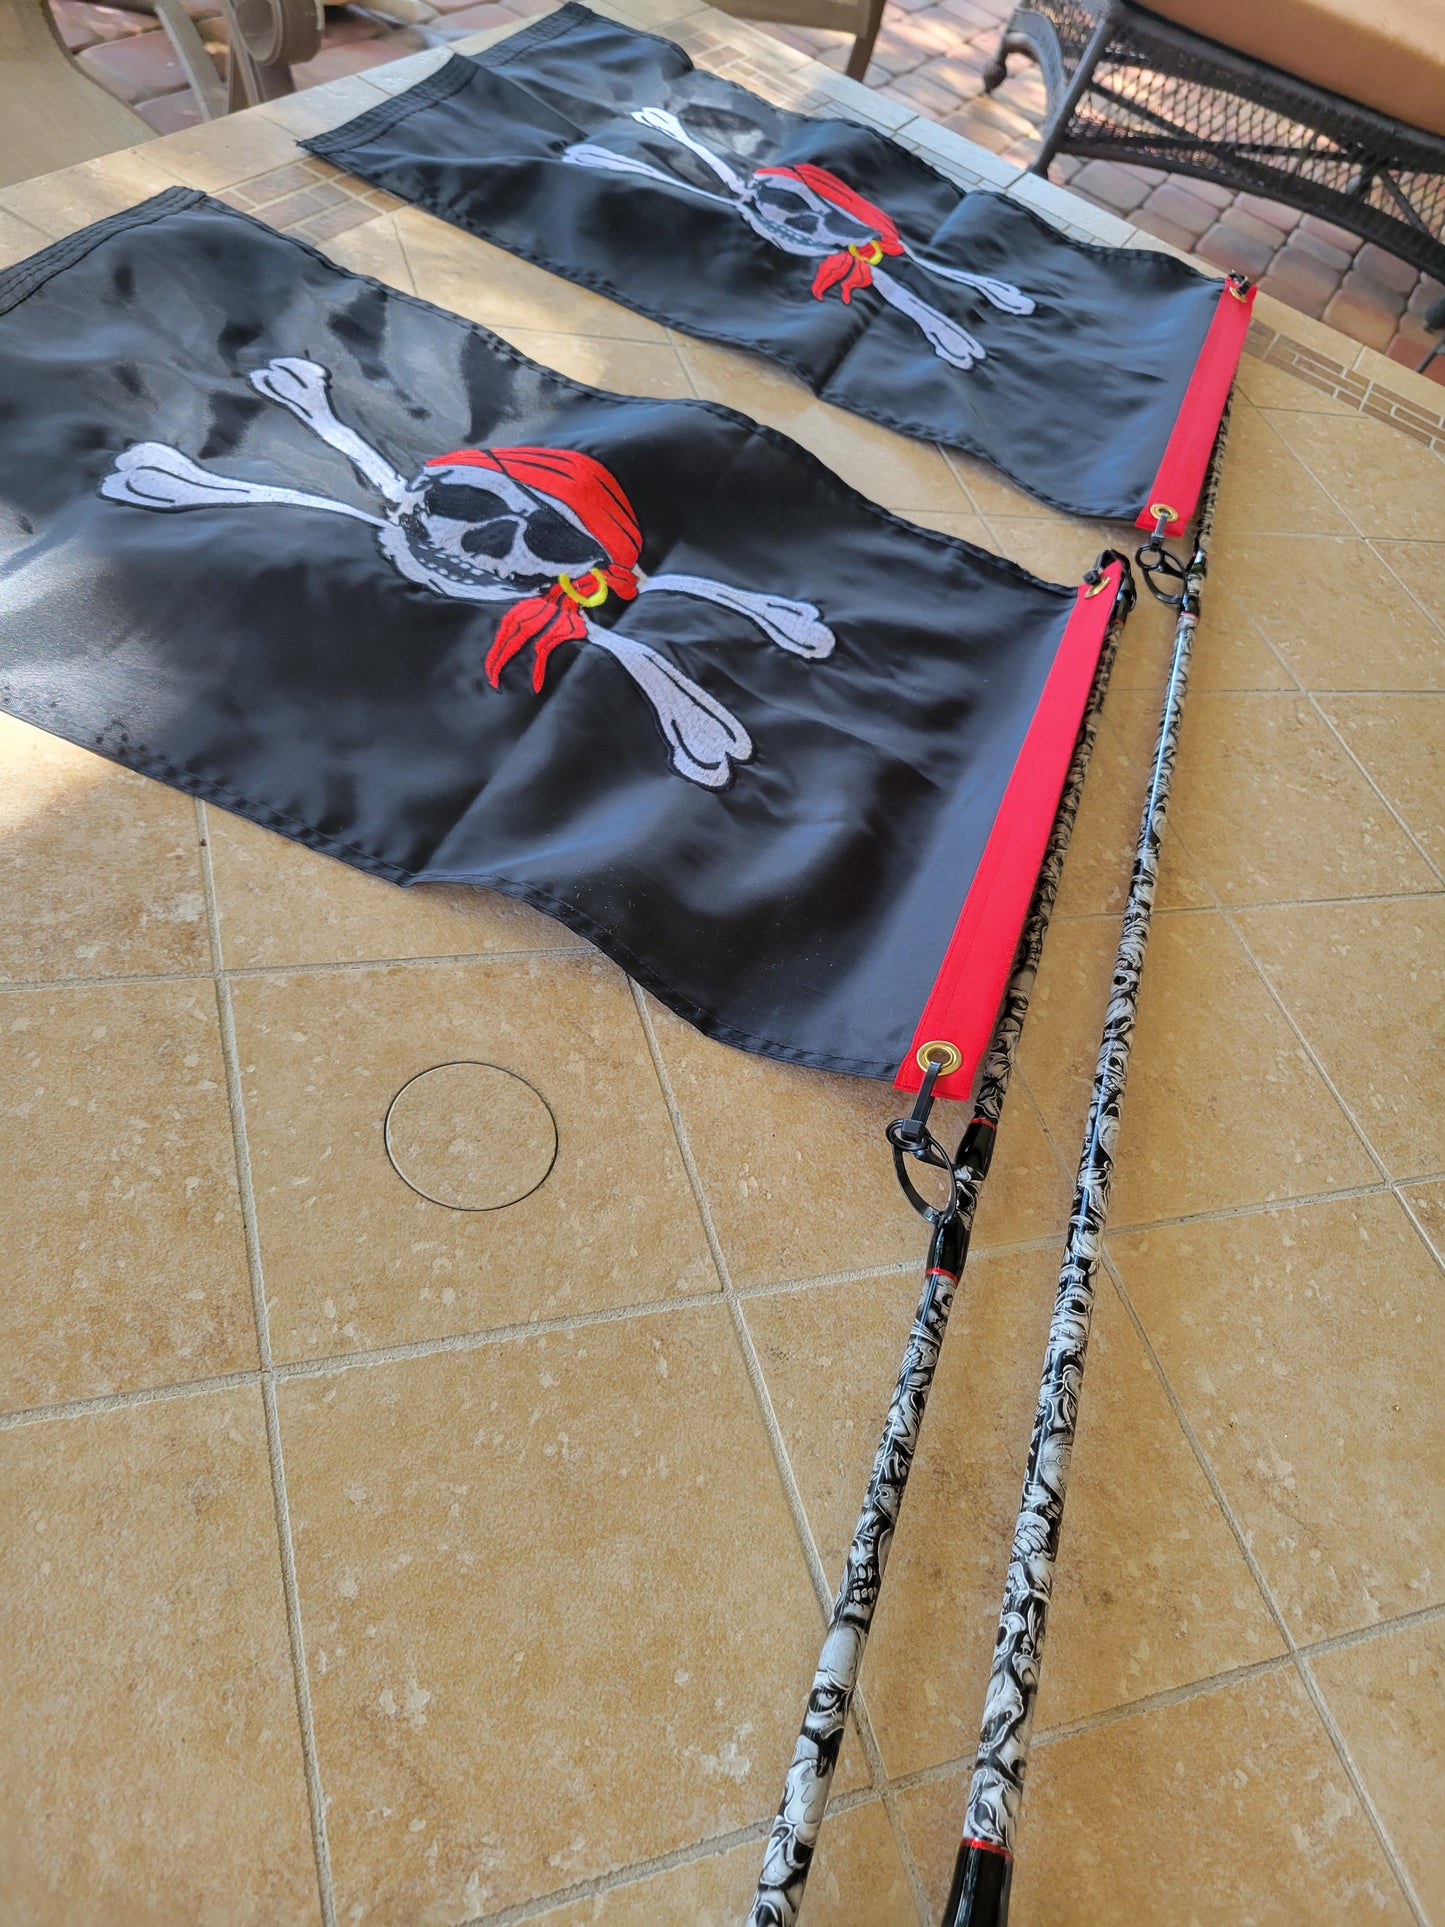 PIRATE SKULL FLAGS